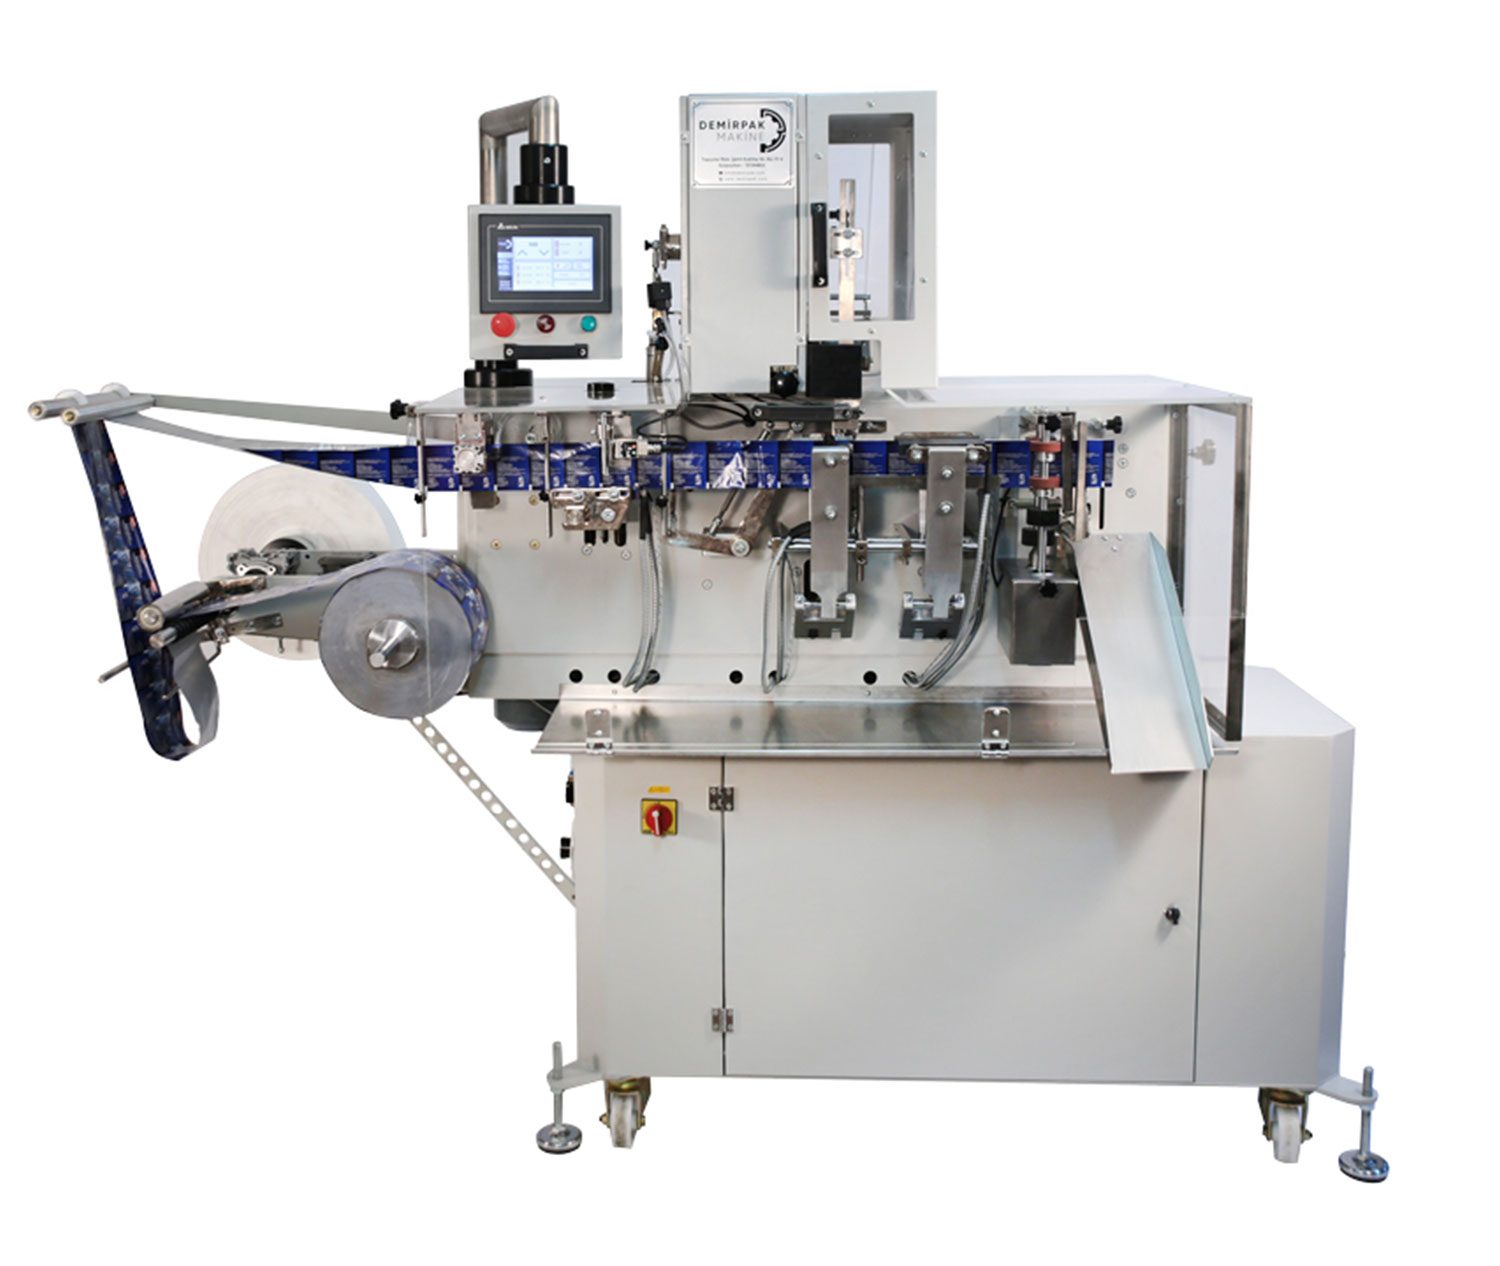 front side of the sachet wet wipes packaging machine